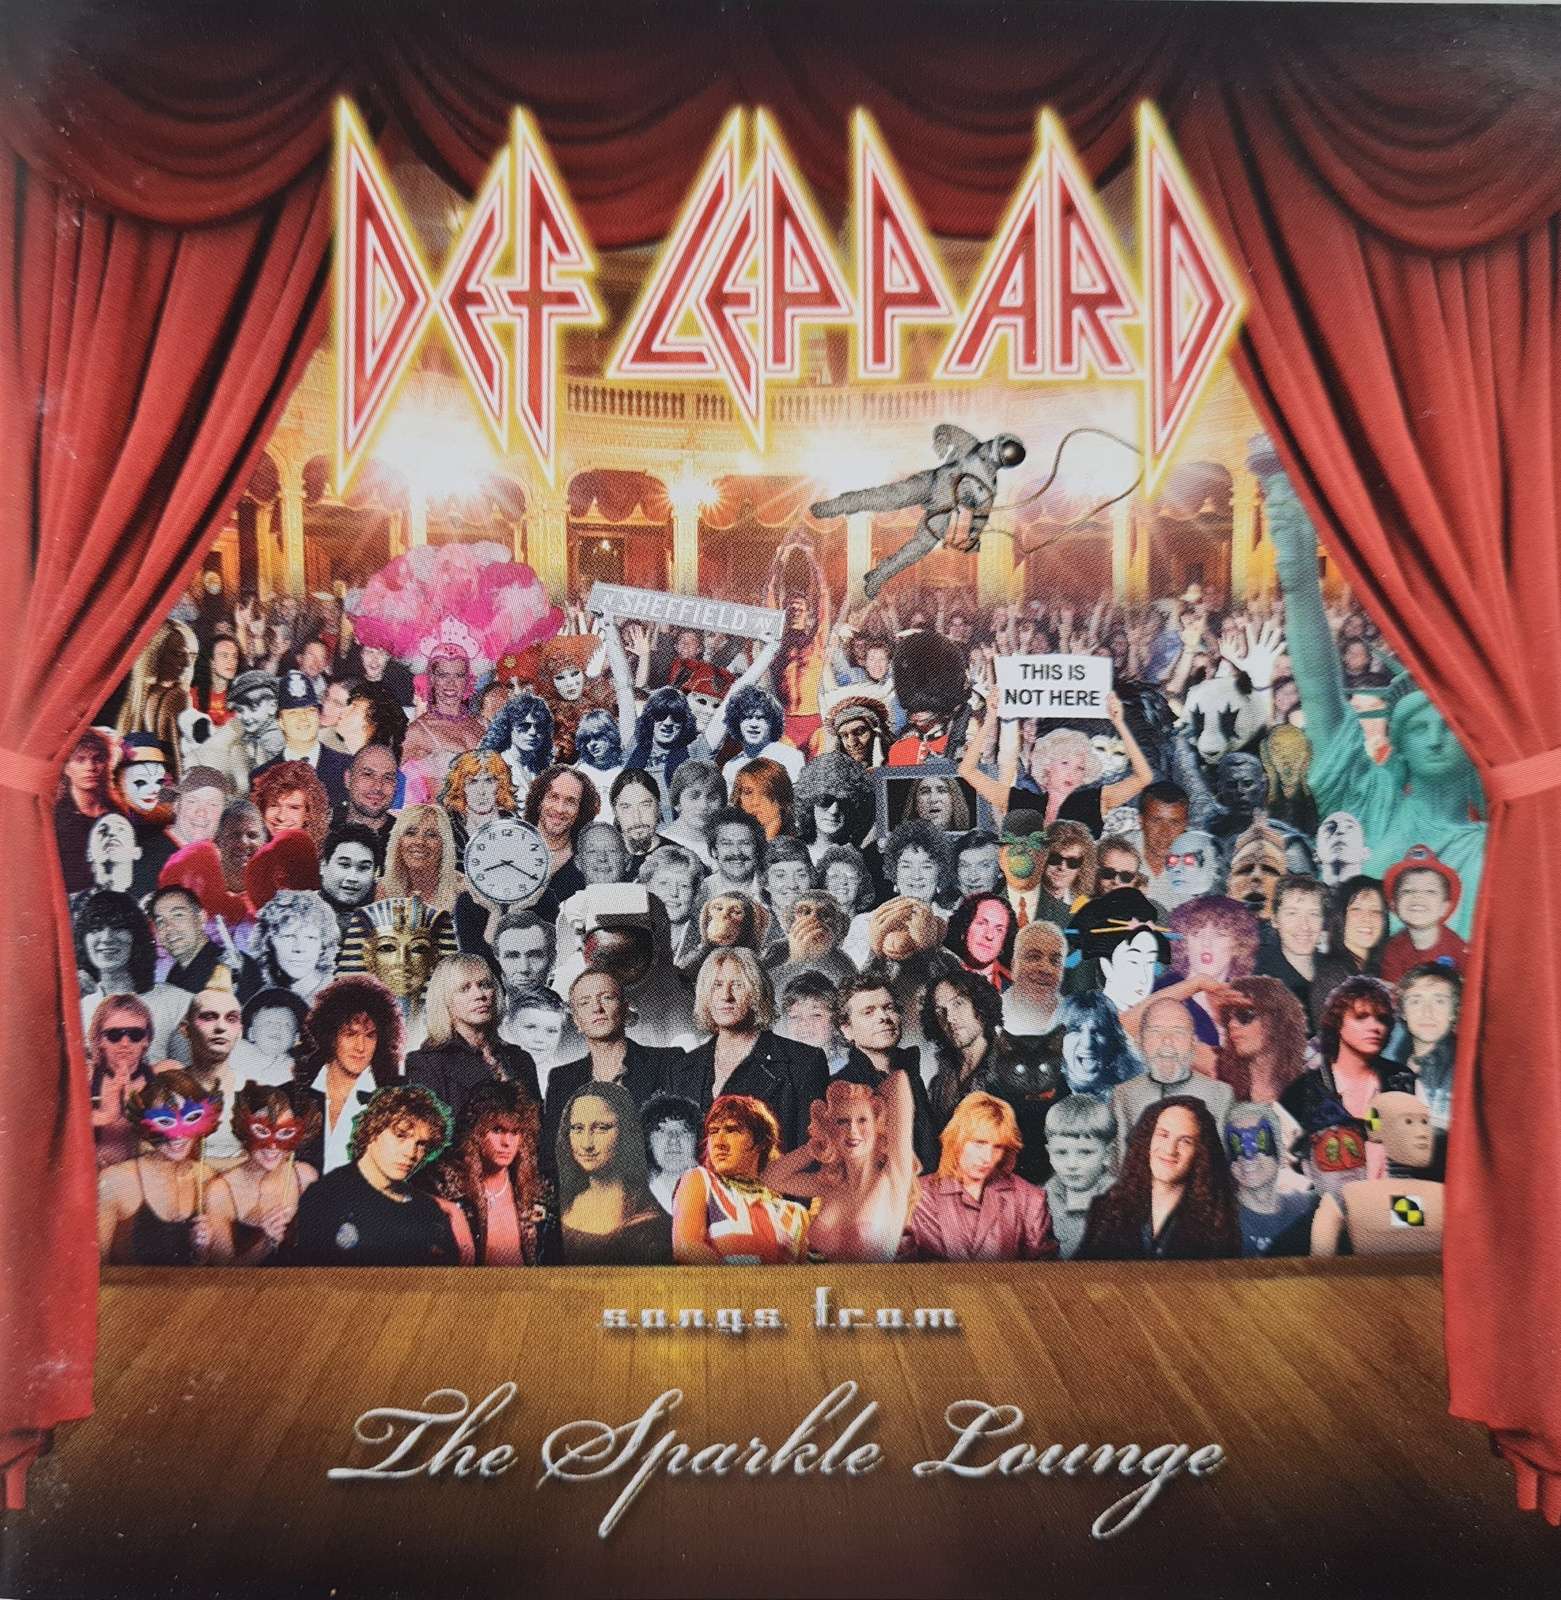 Def Leppard - Songs from the Sparkle Lounge (CD)